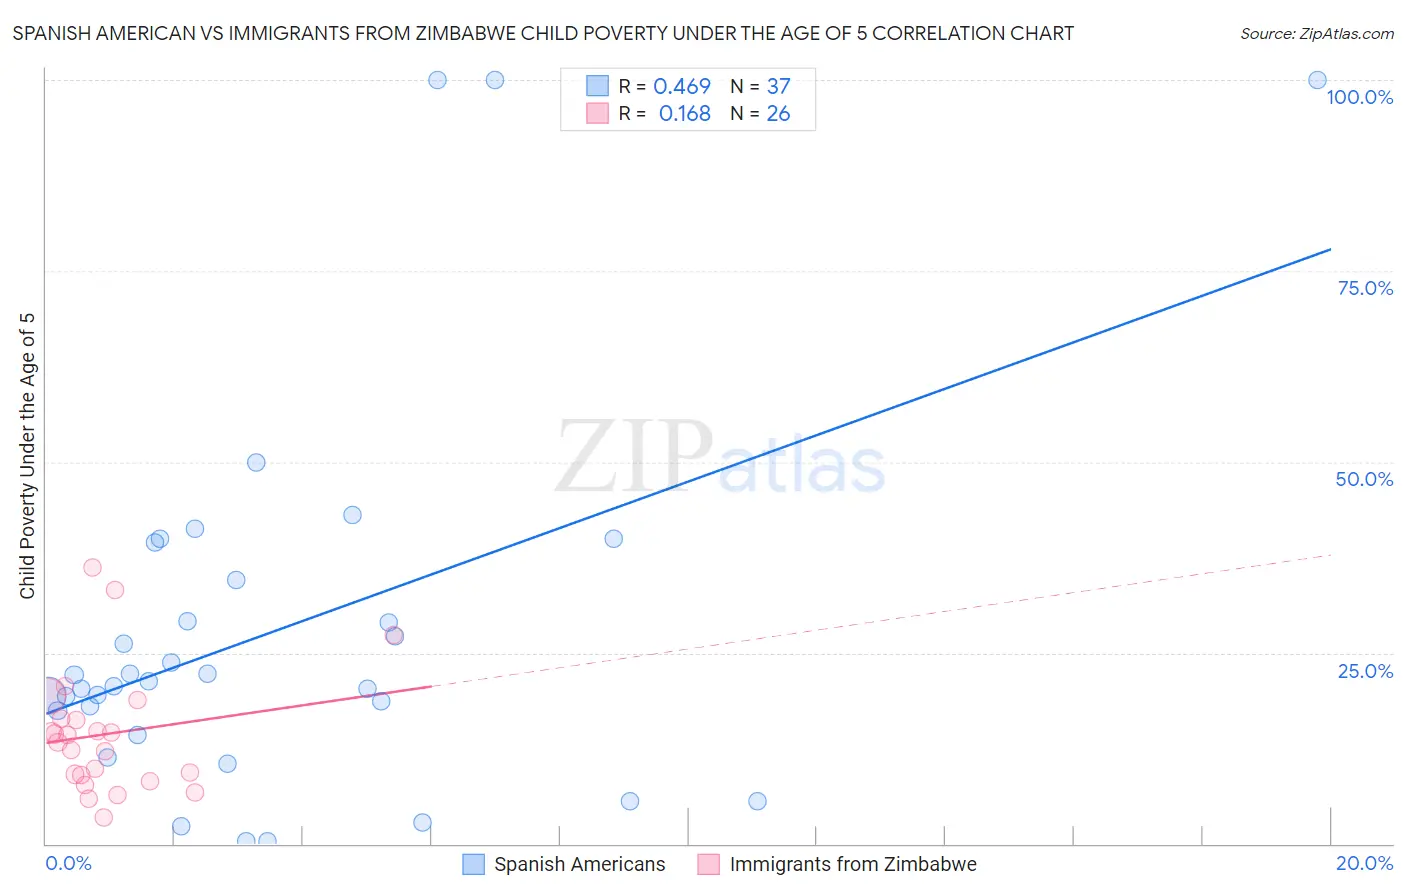 Spanish American vs Immigrants from Zimbabwe Child Poverty Under the Age of 5